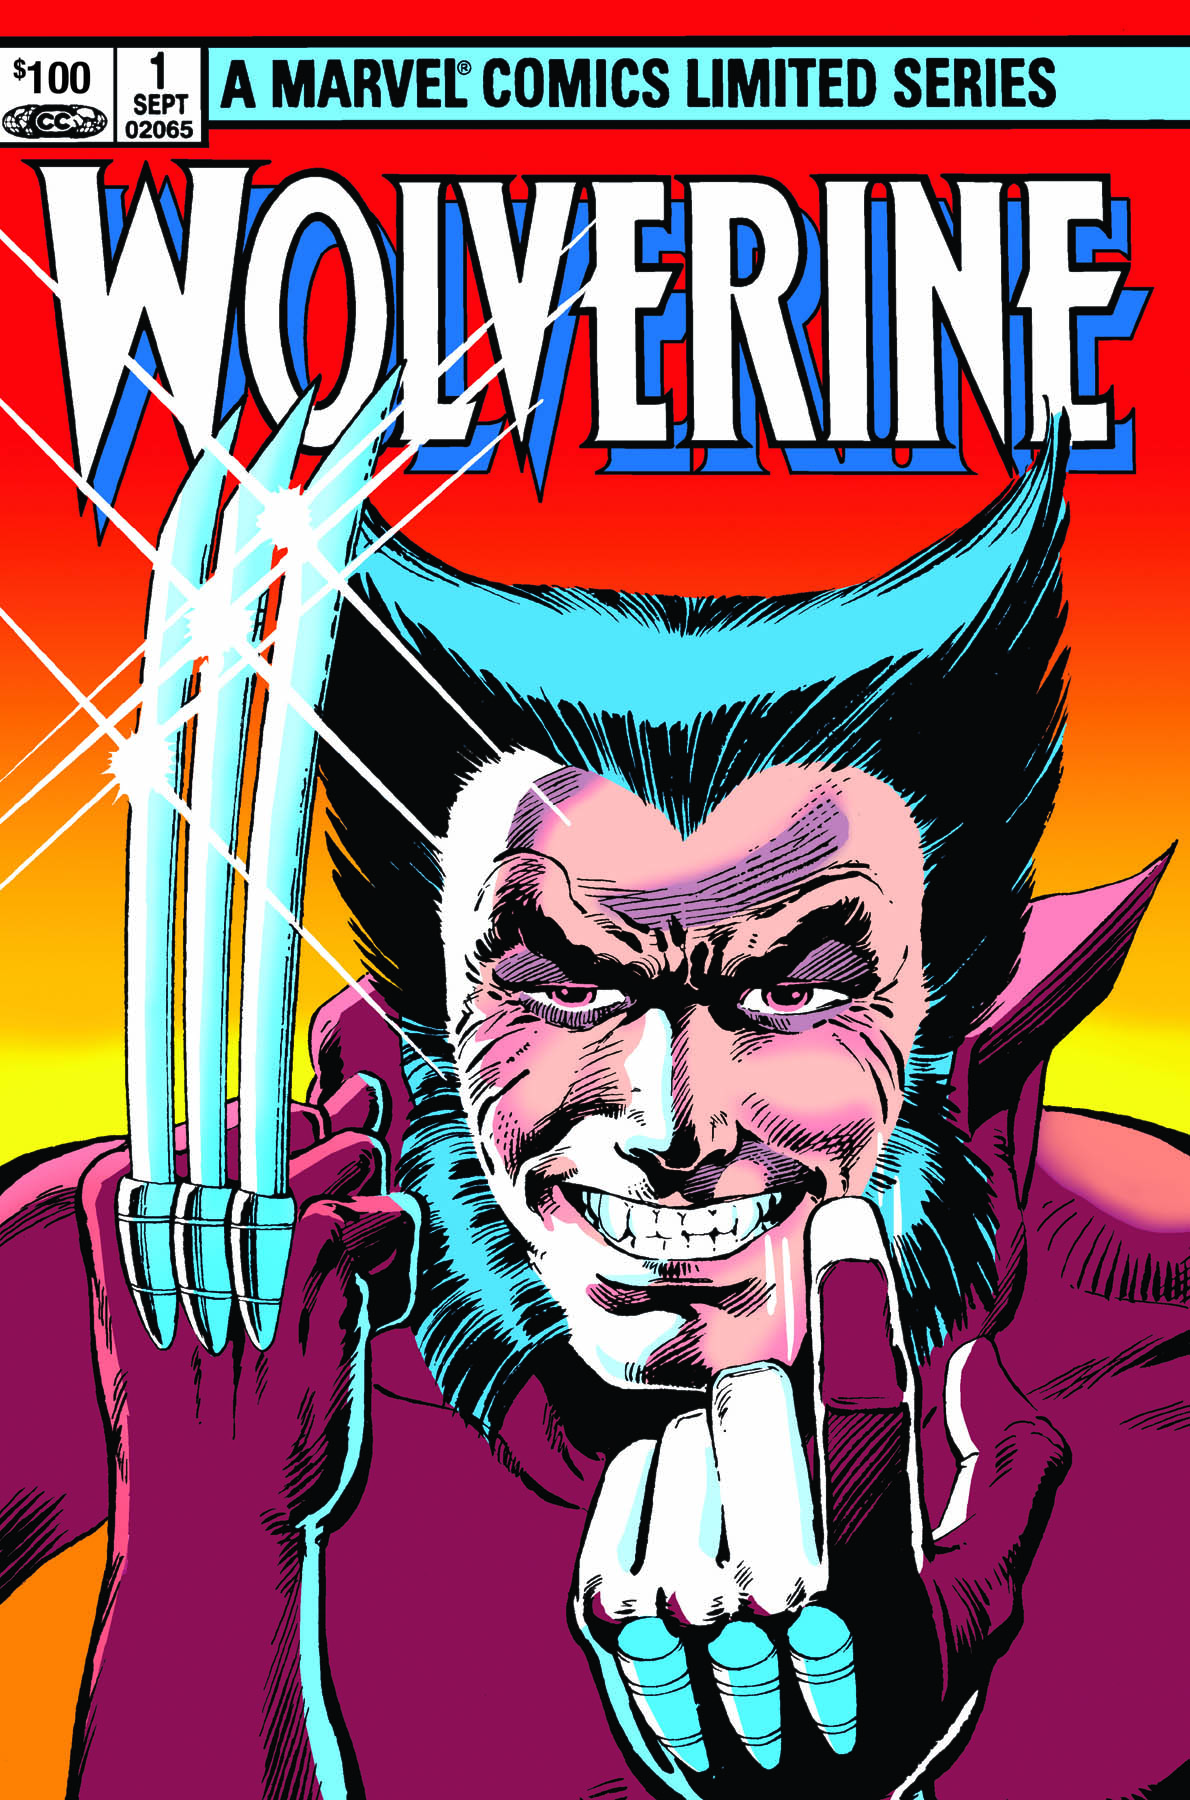 WOLVERINE OMNIBUS VOL 1 HC MILLER COVER NEW PRINTING (Trade